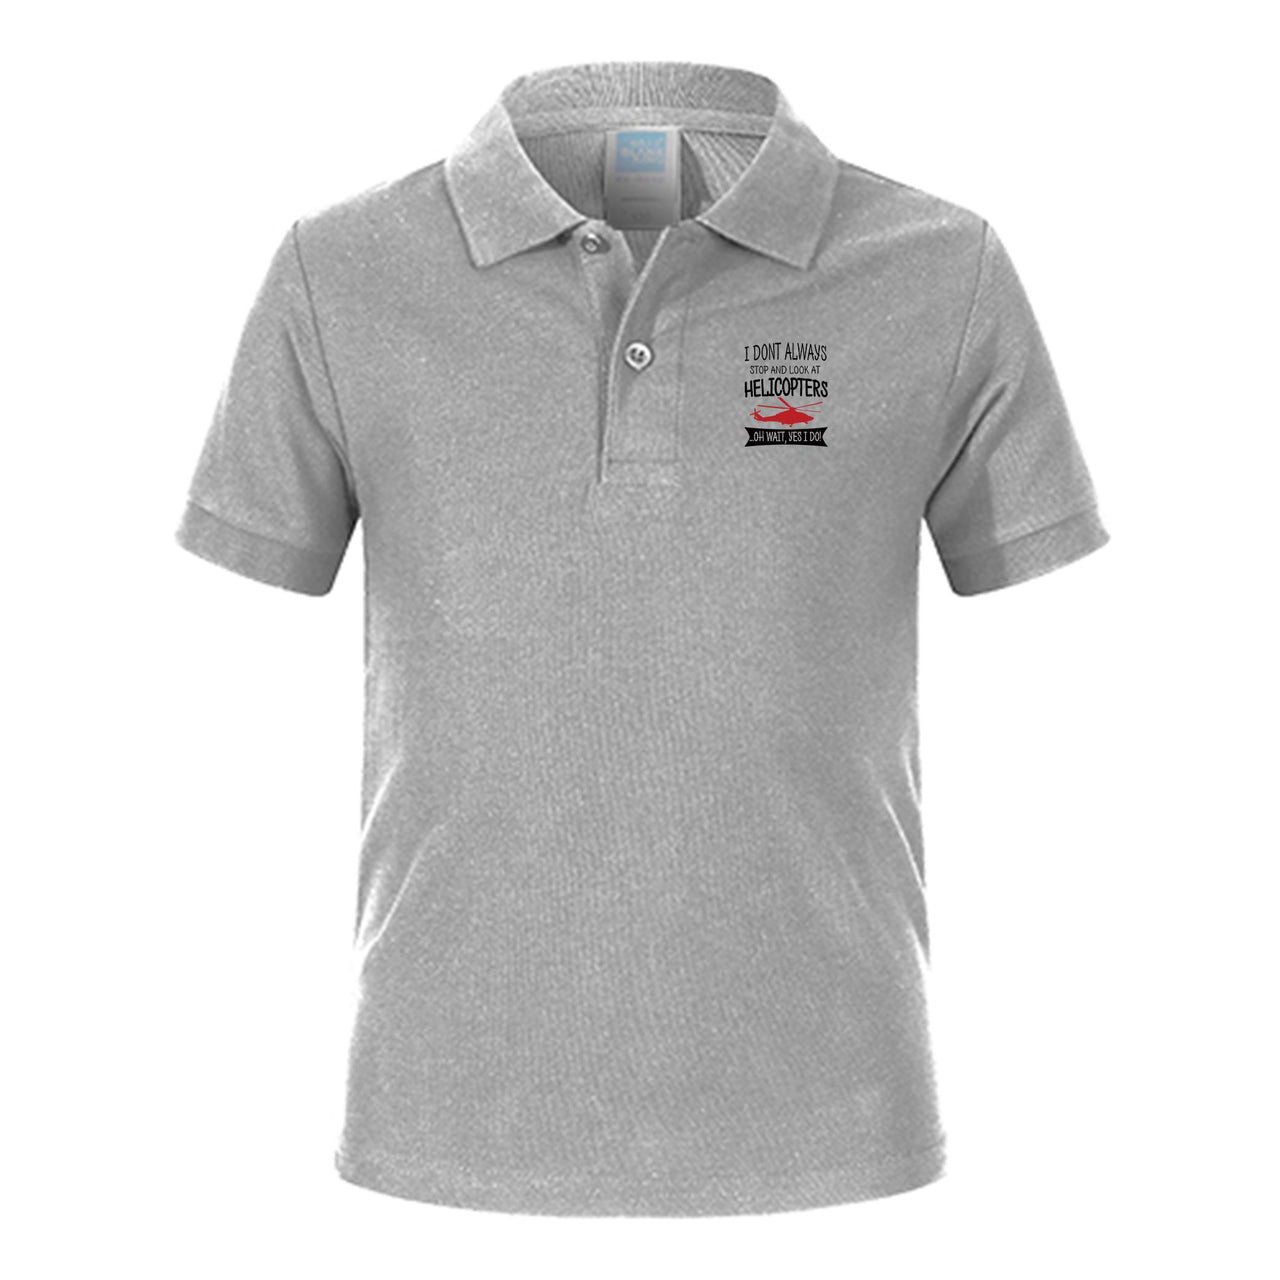 I Don't Always Stop and Look at Helicopters Designed Children Polo T-Shirts